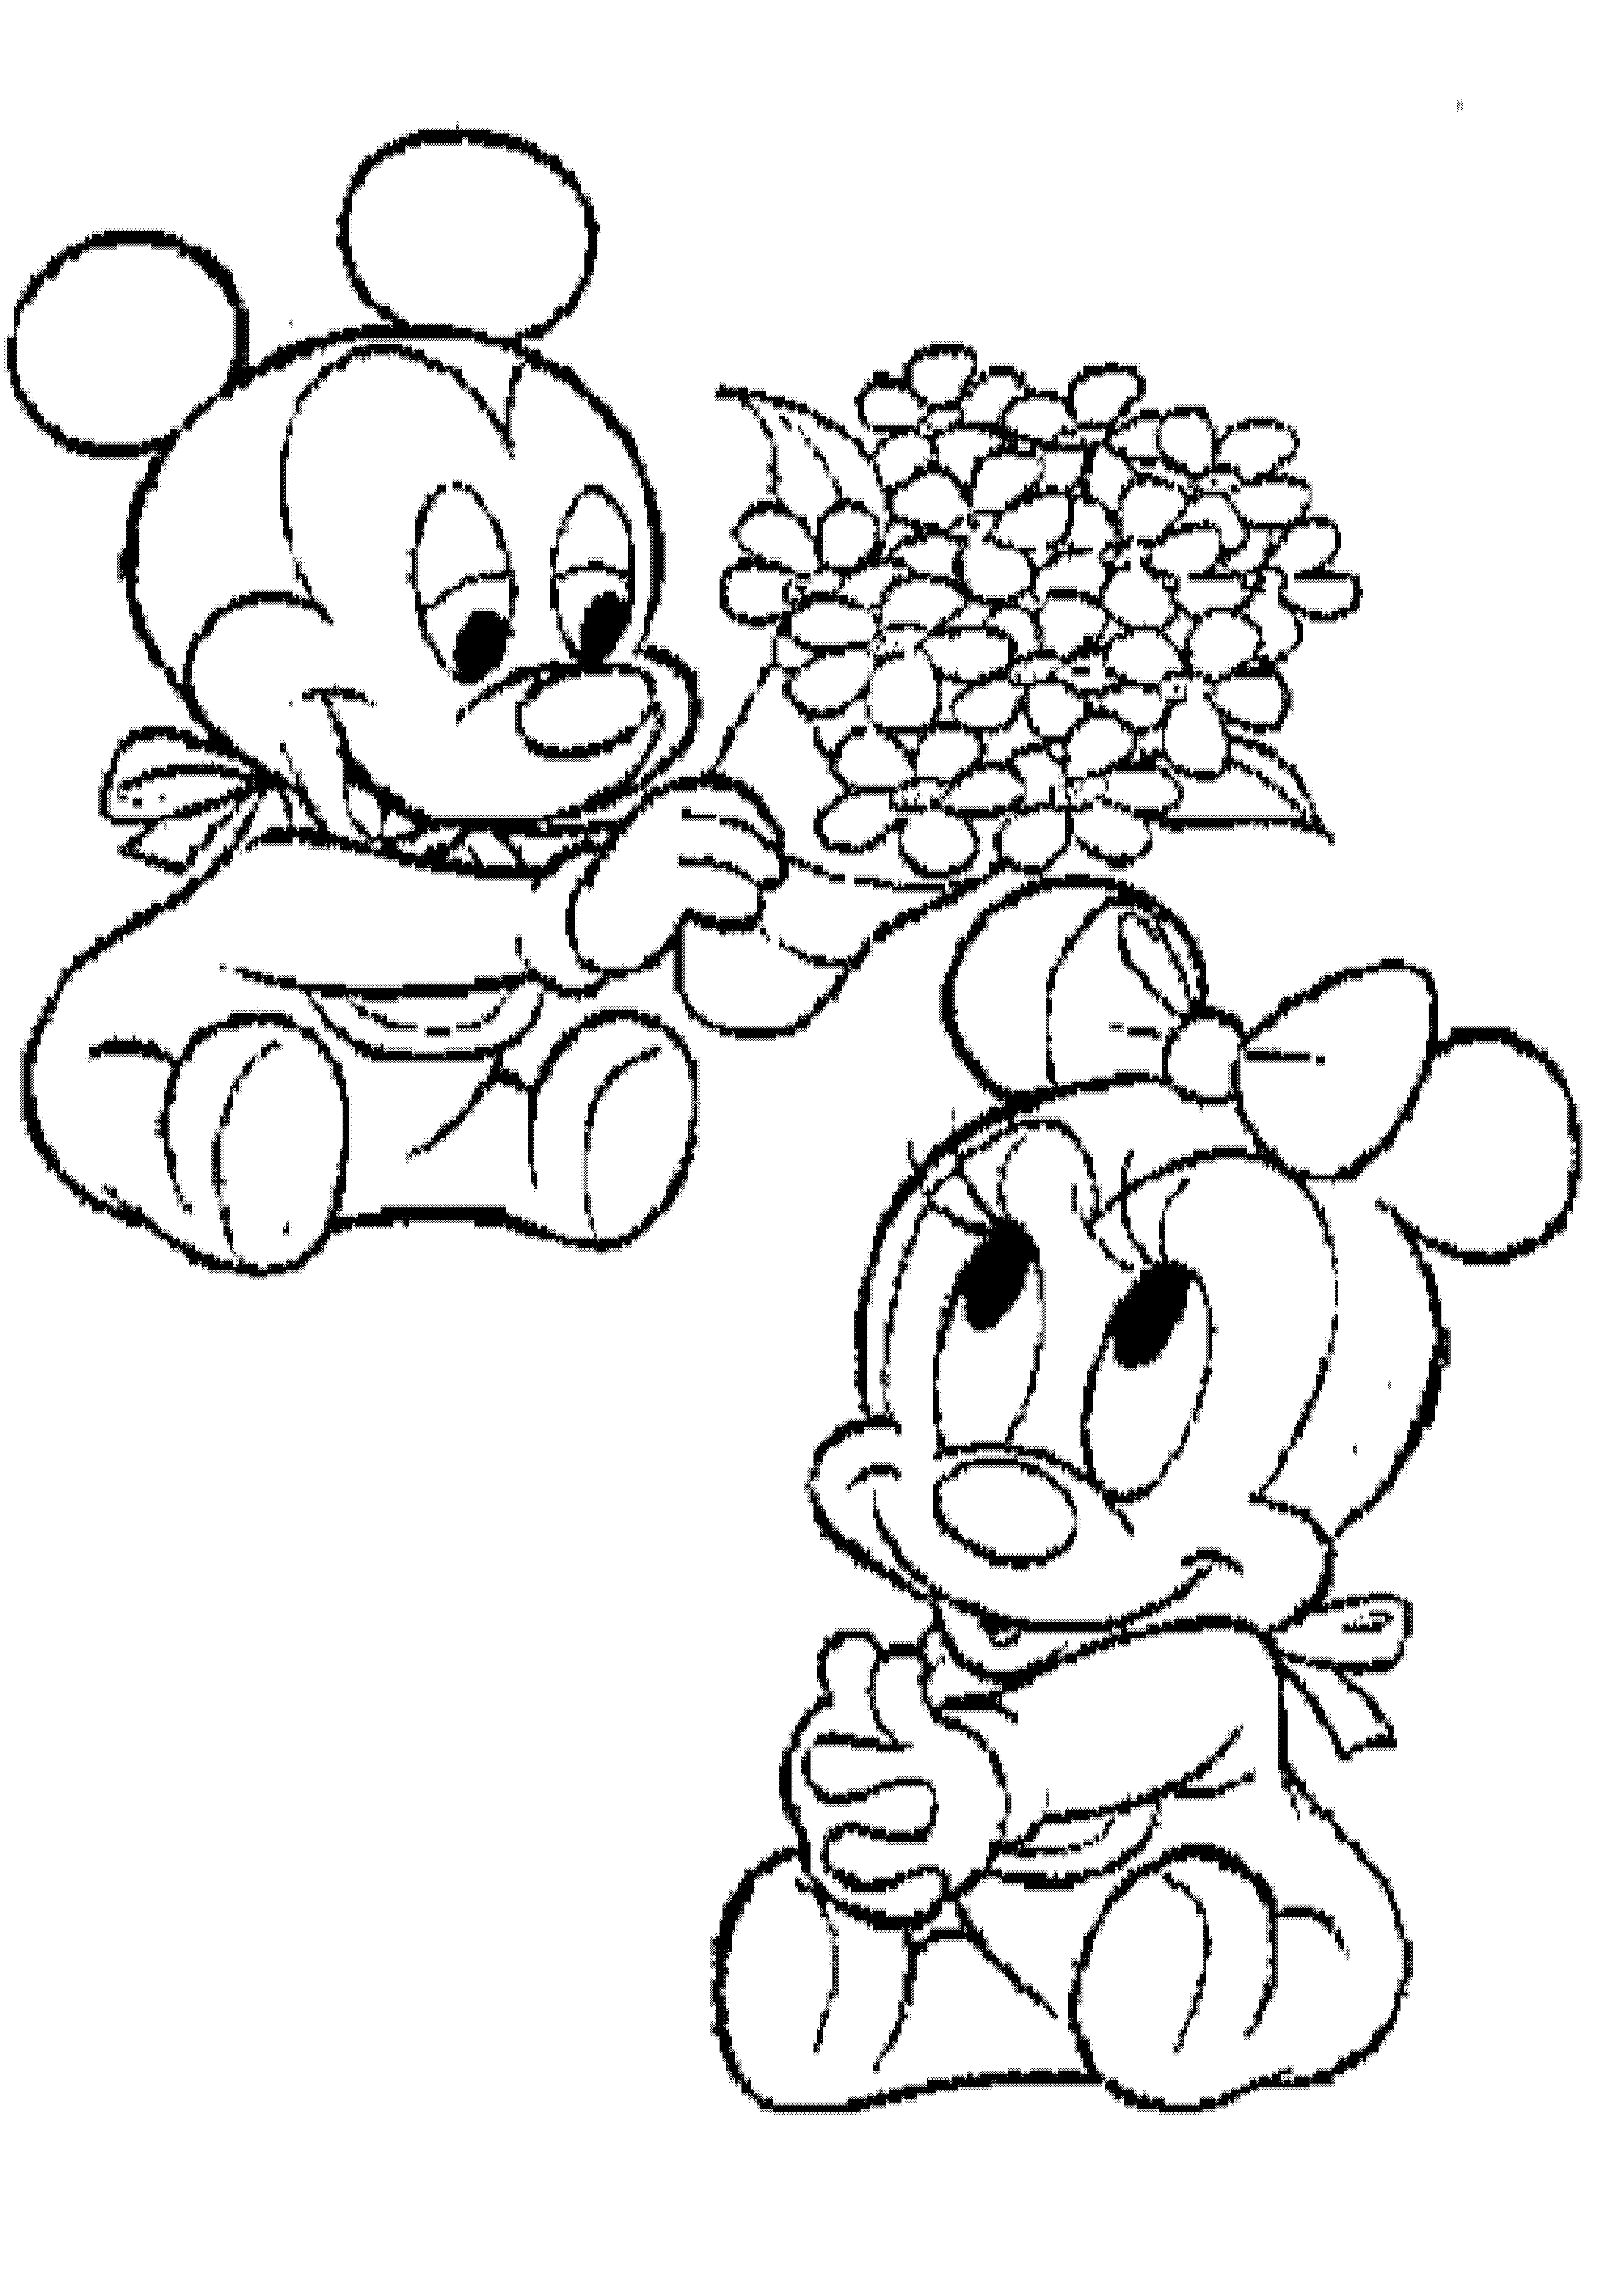 Baby Minnie Mouse Coloring Pages Page 1